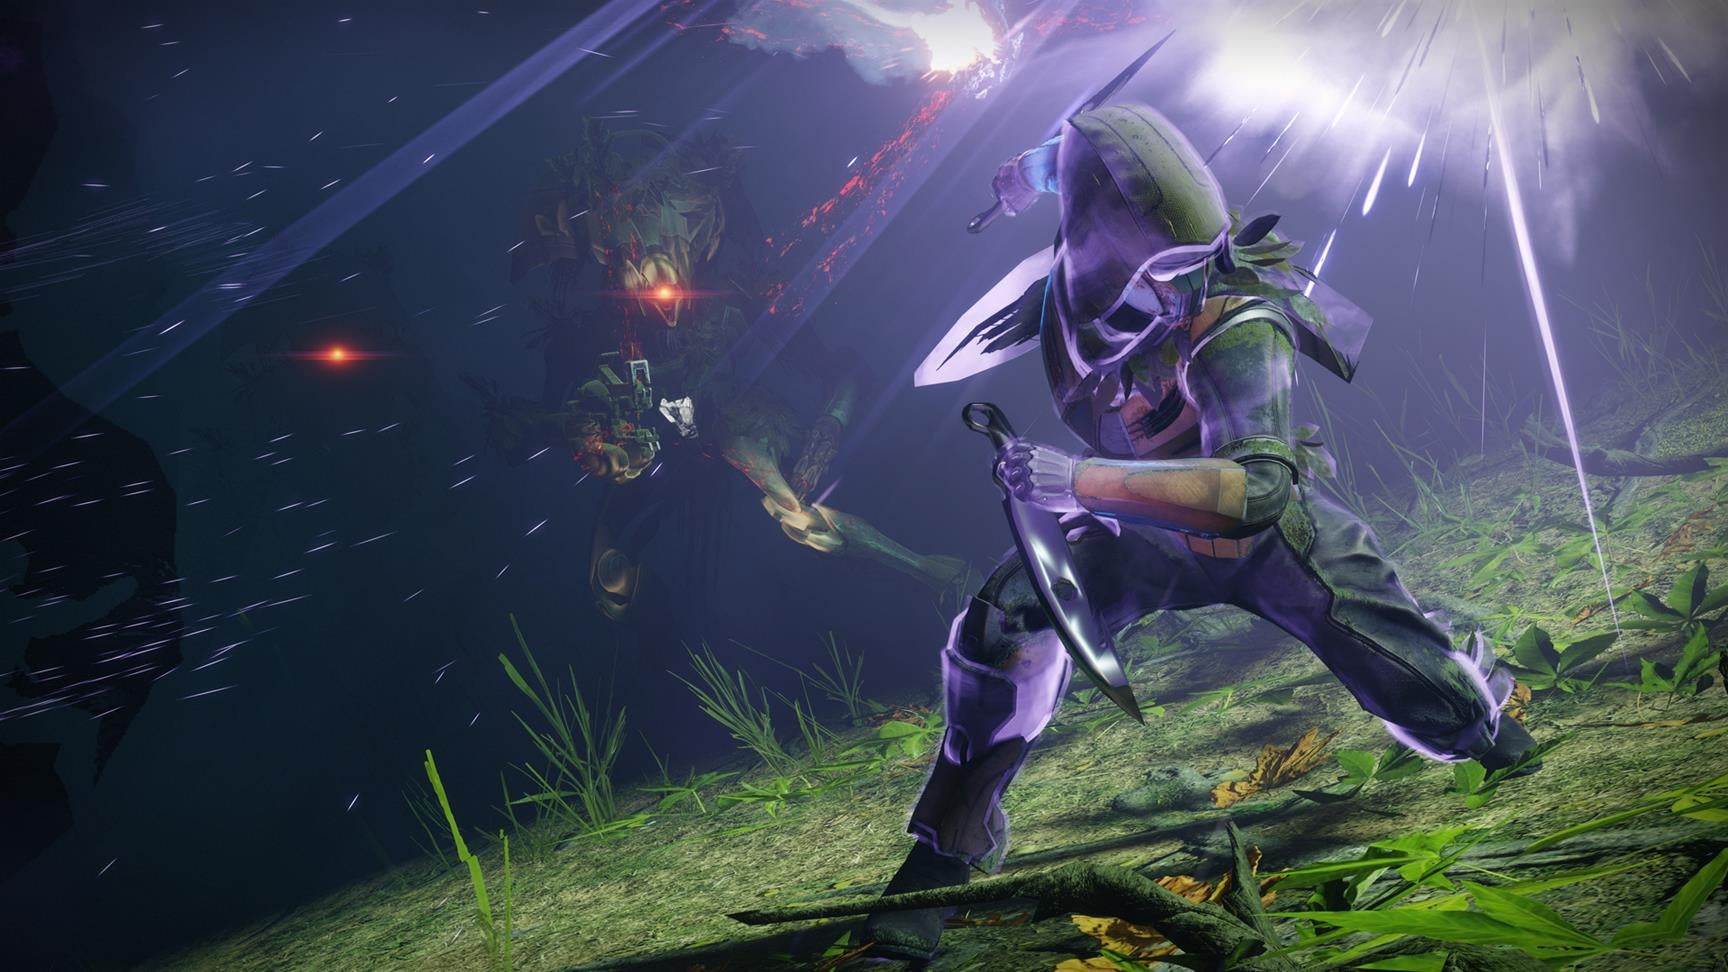 Image for Bungie's new IP is a whimsical loot game, according to job listings